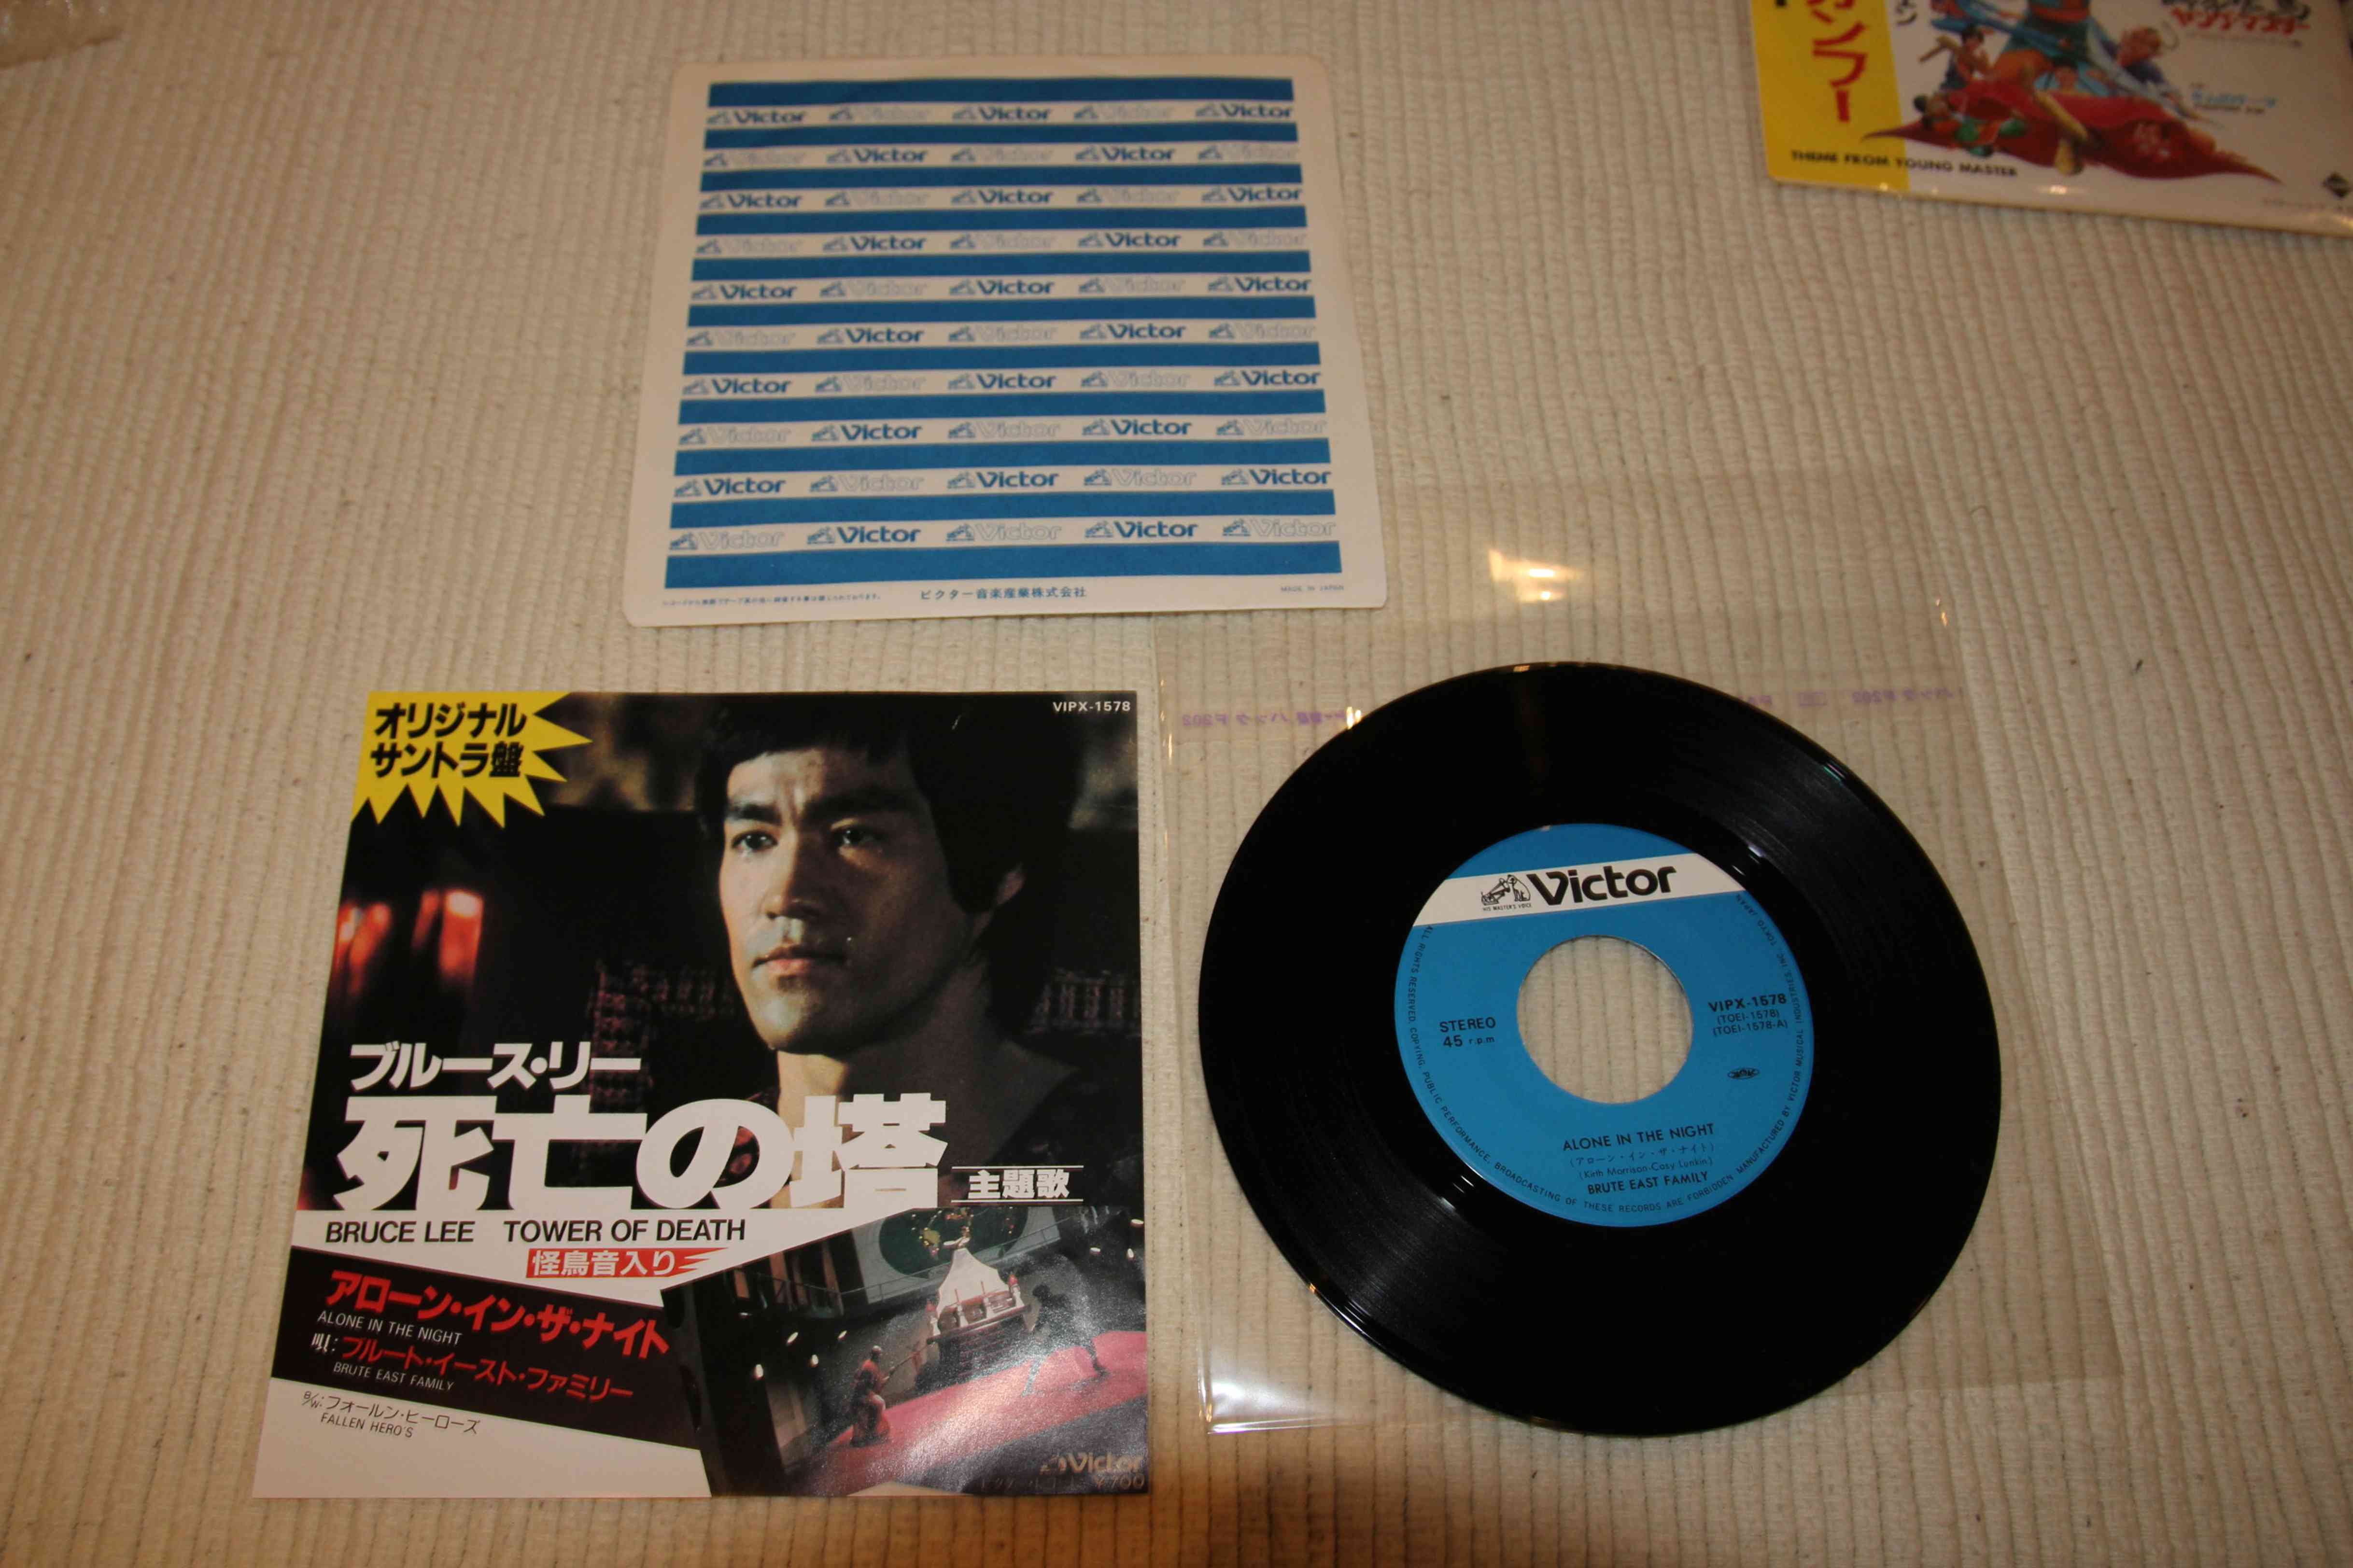 BRUCE LEE - TOWER OF DEATH : ALONE IN THE NIGHT - JAPAN